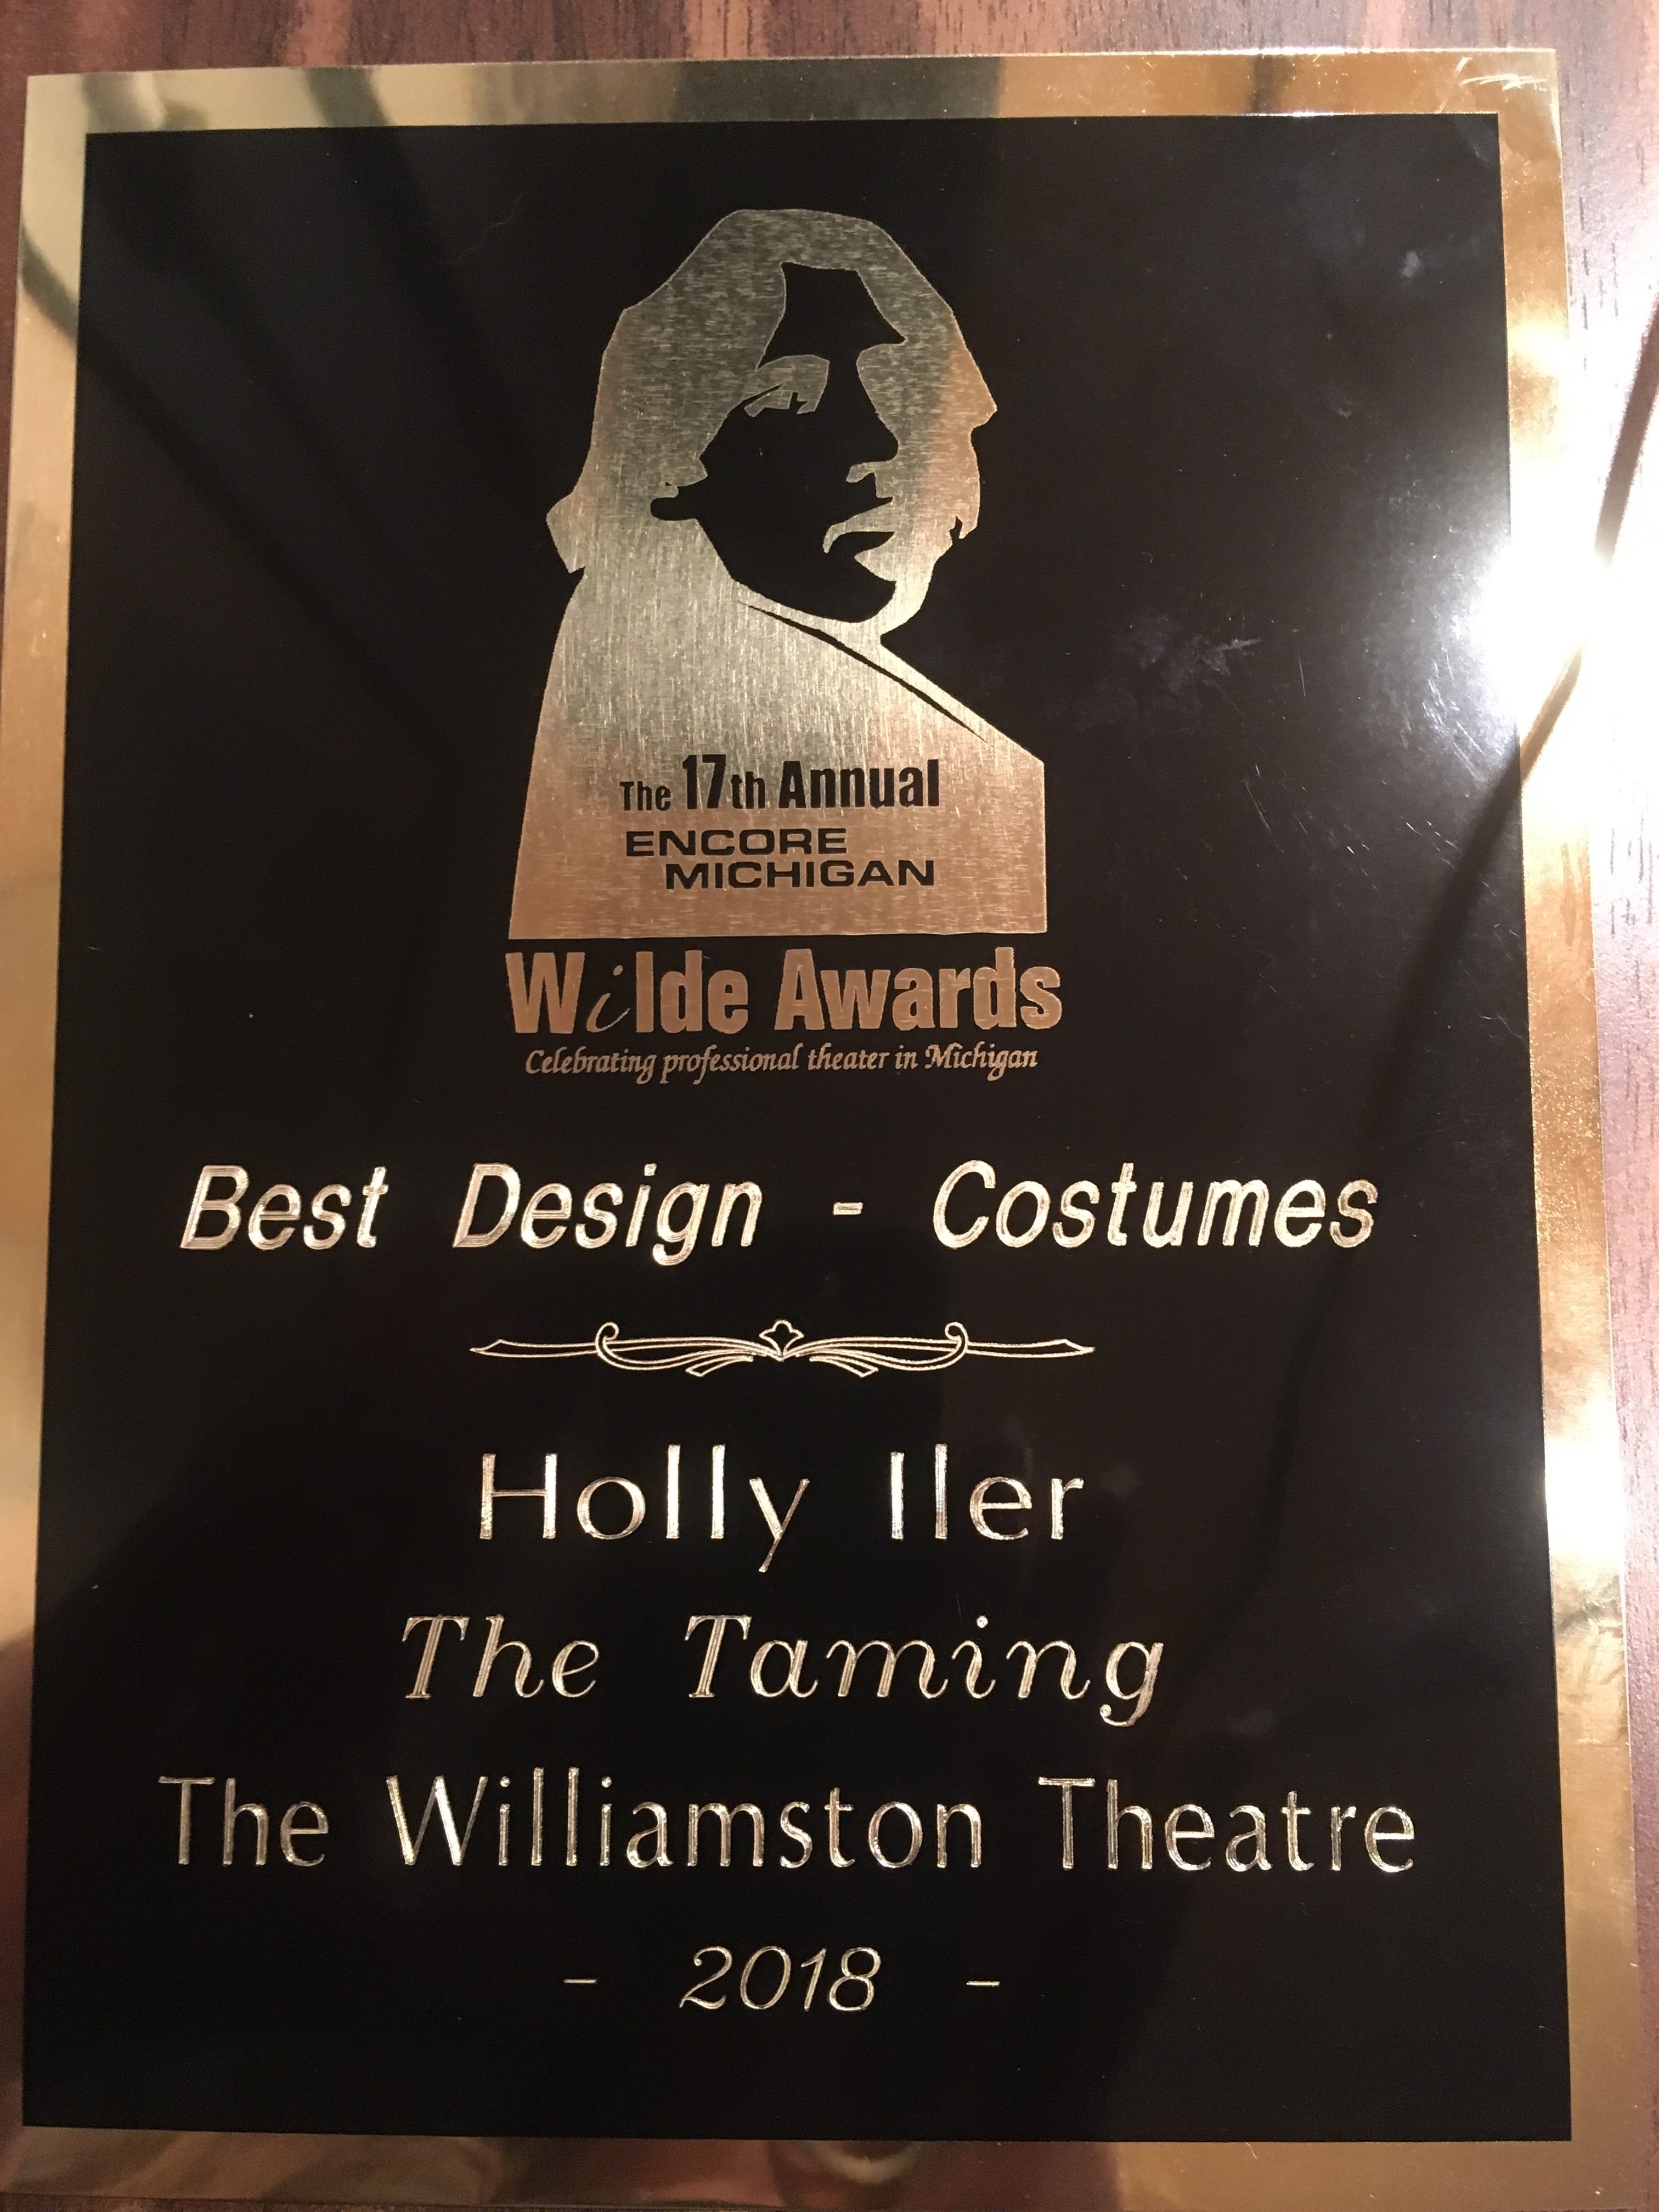 Photo of a 2017 showing of The Taming at the Williamston Theatre in Williamston, Michigan